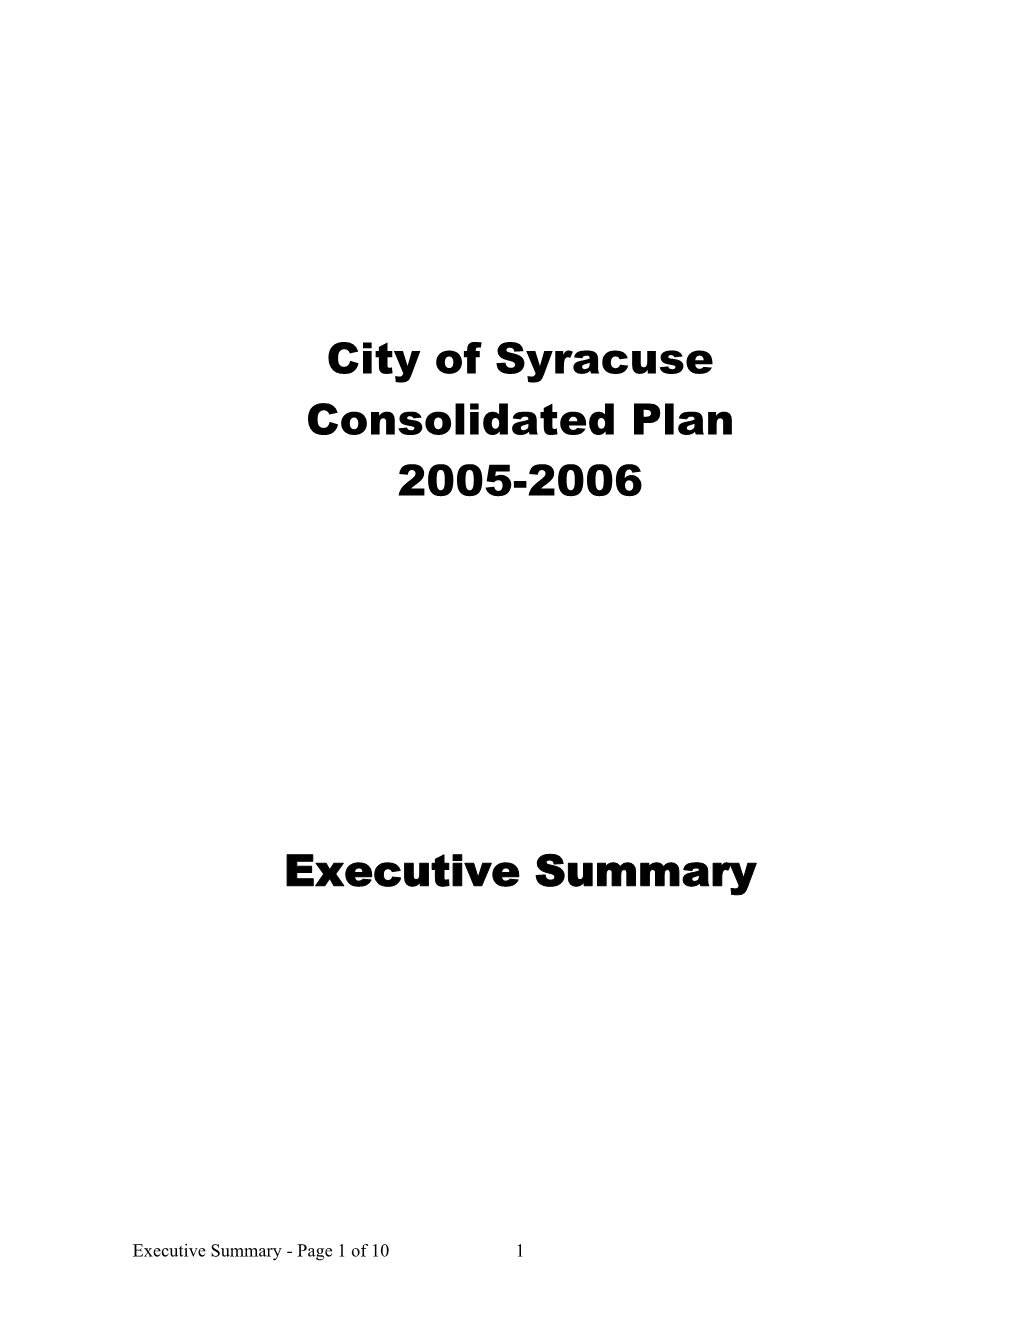 Barriers to Affordable Housing in the City of Syracuse